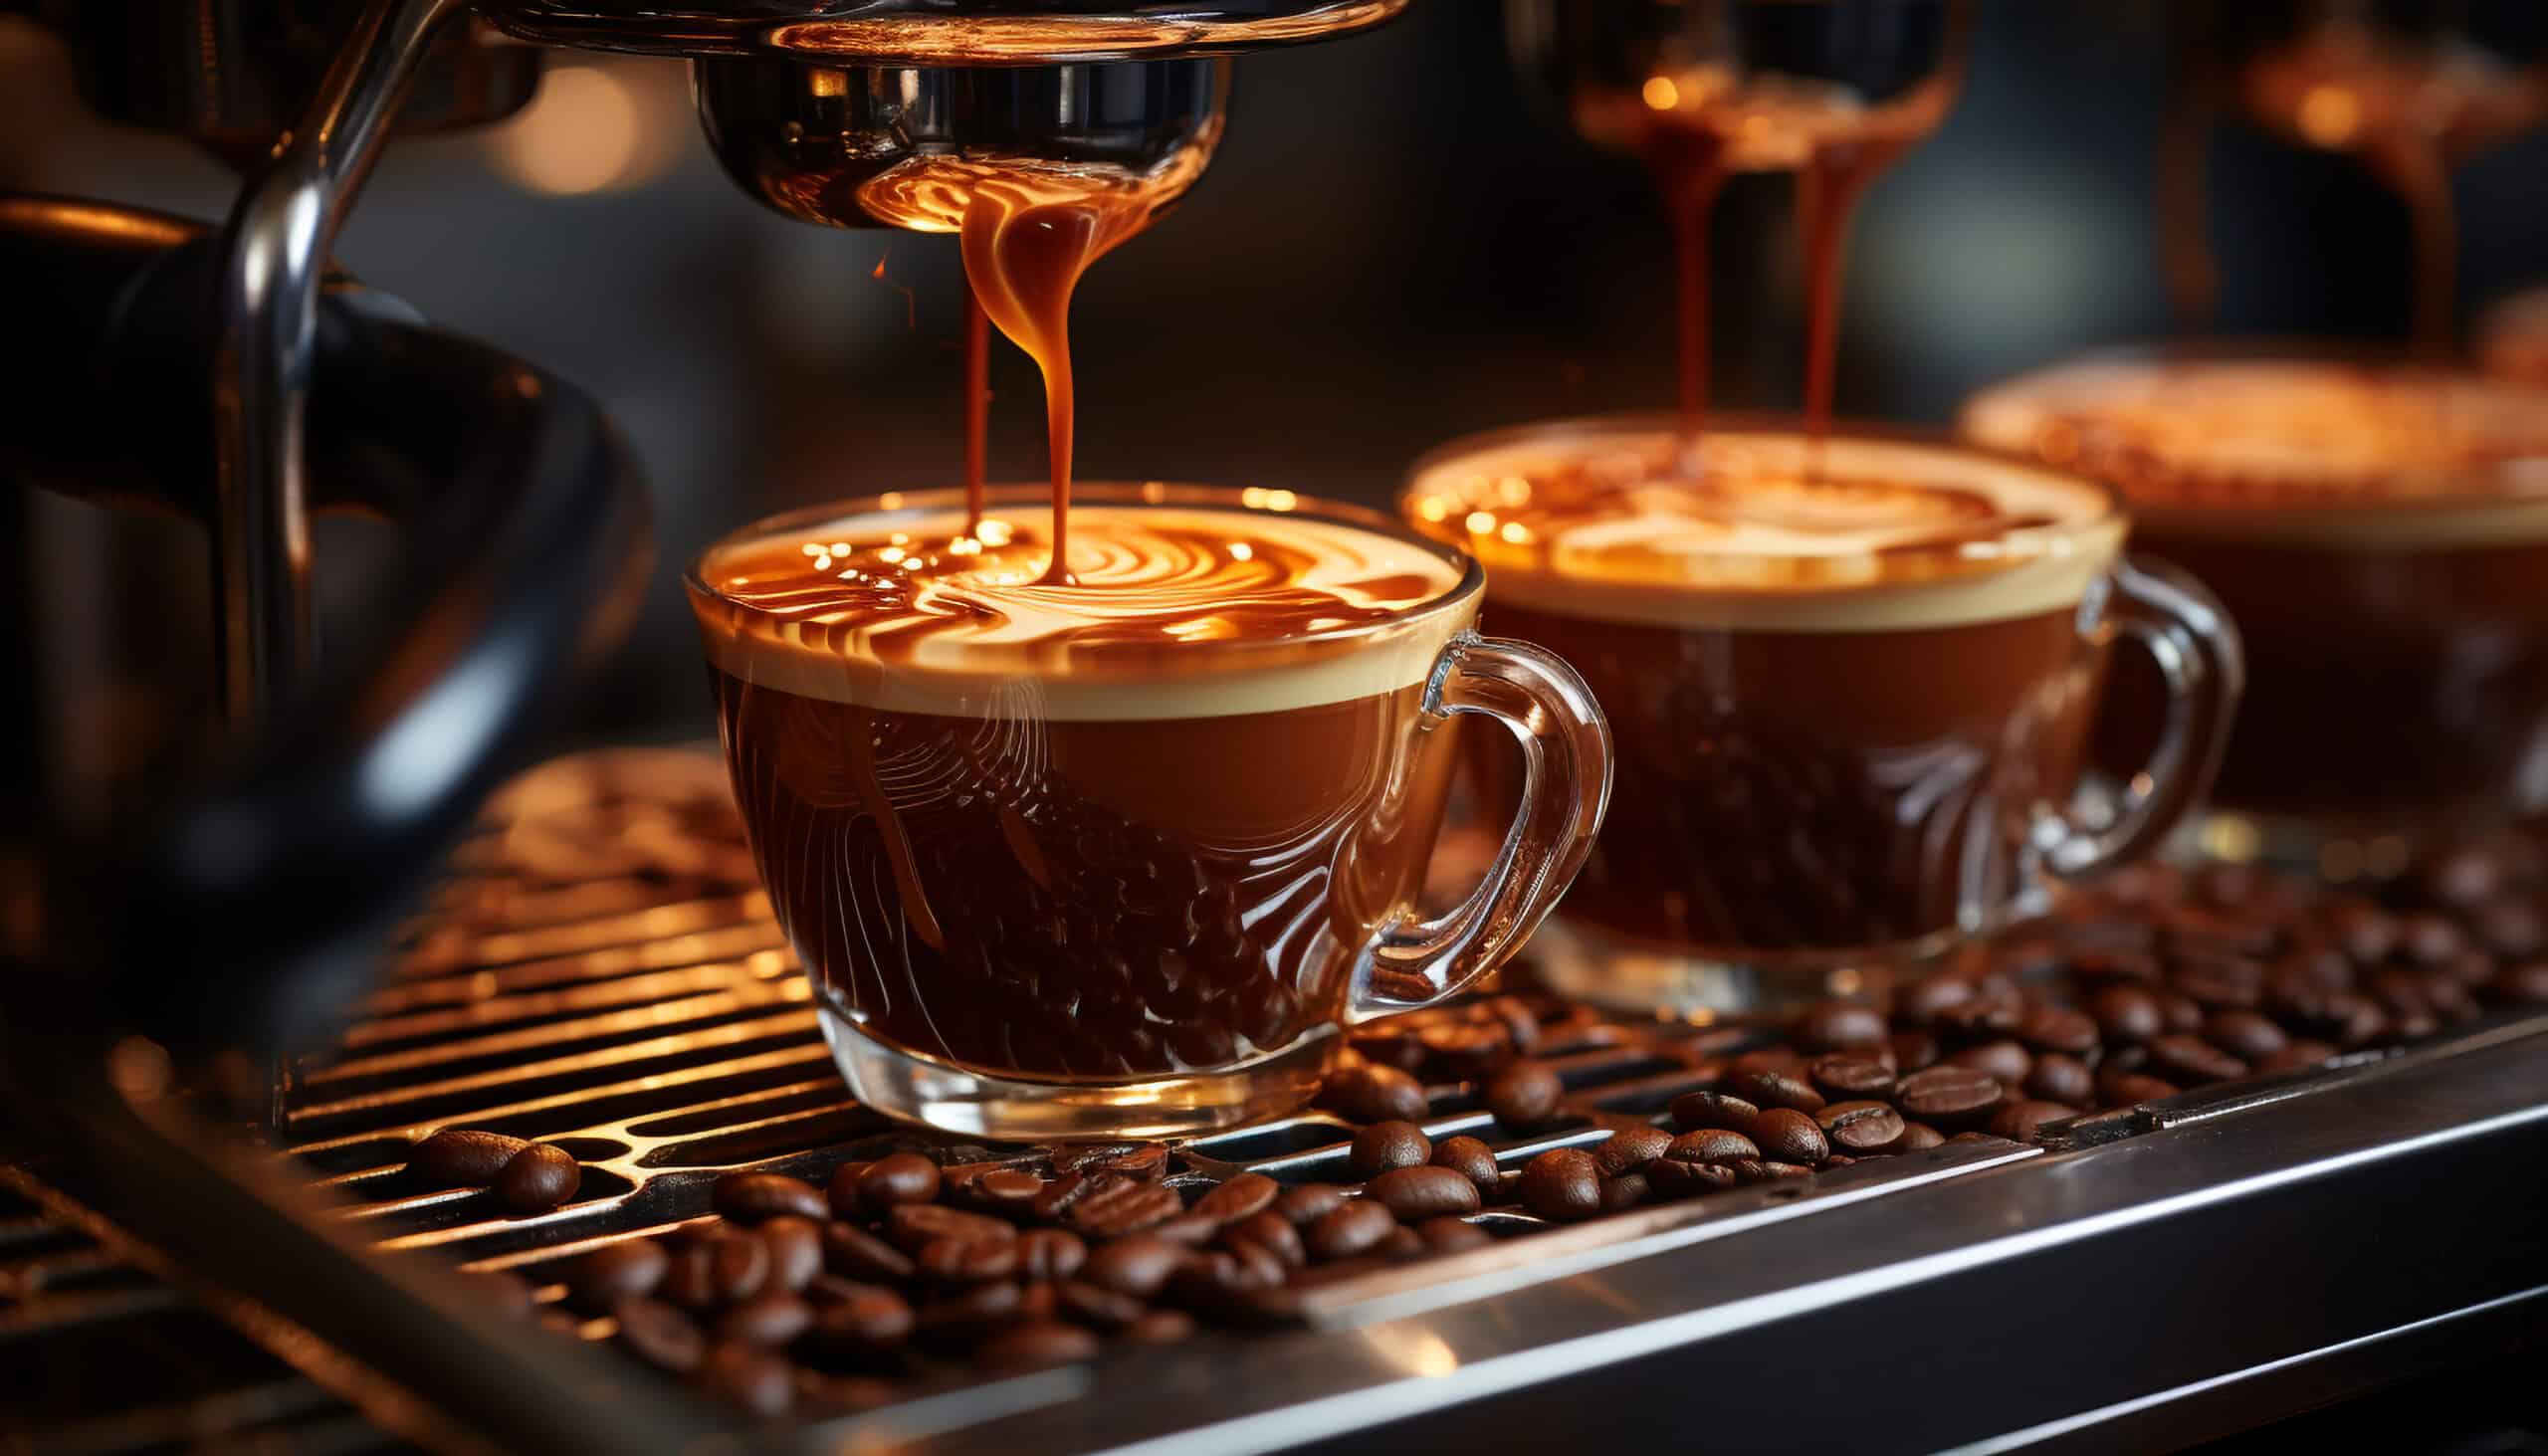 www.appr.com : Can You Use Coffee Beans In An Espresso Machine?